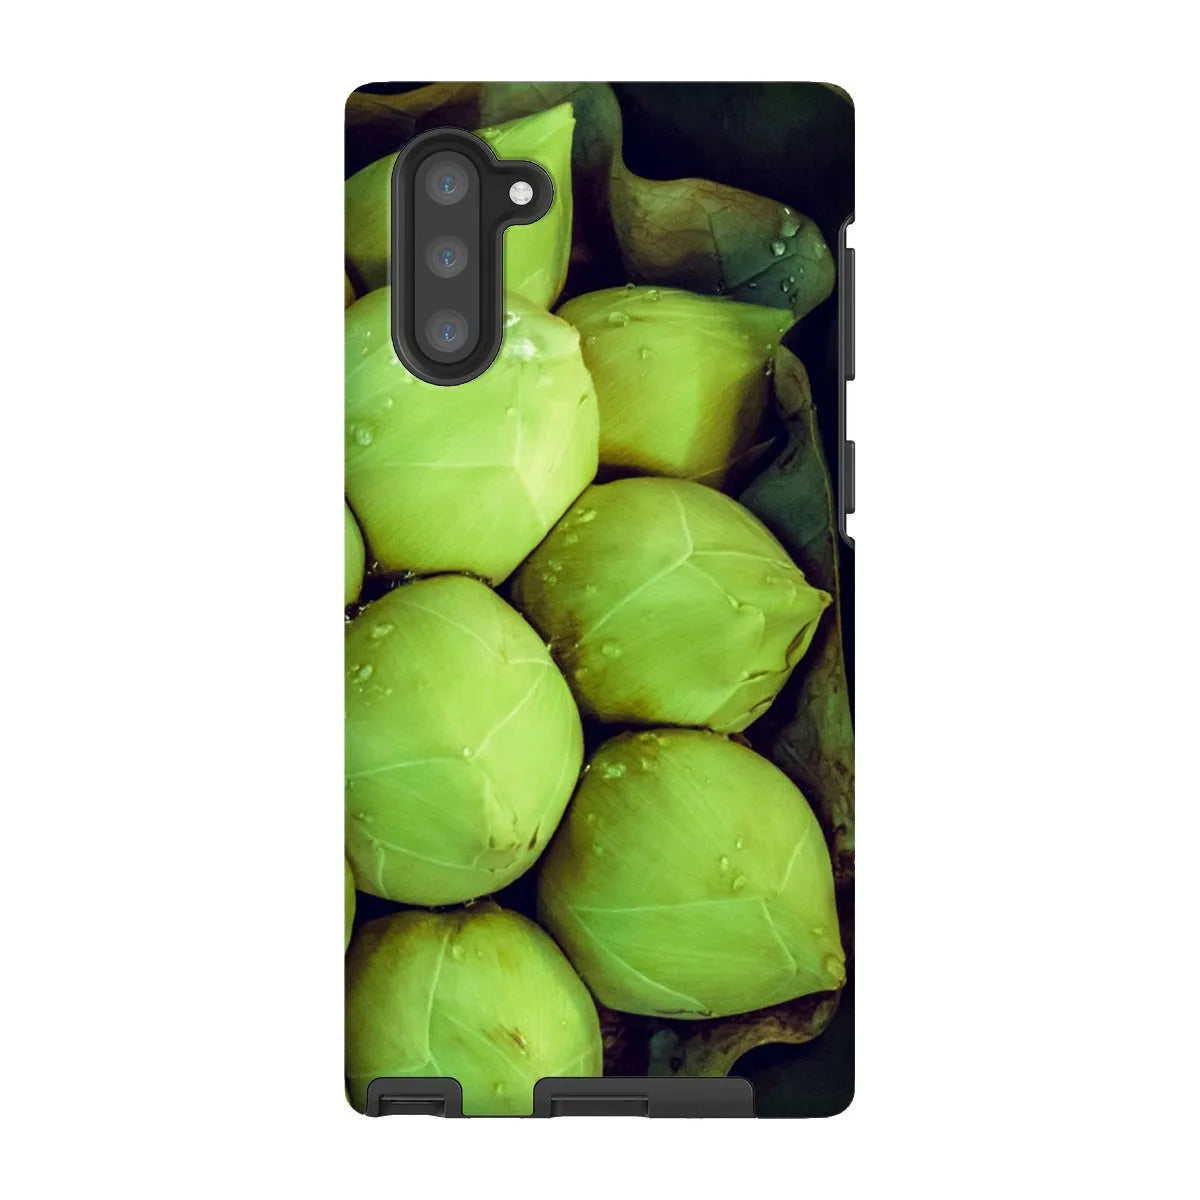 Ingenues Tough Phone Case - Samsung Galaxy Note 10 / Matte - Mobile Phone Cases - Aesthetic Art